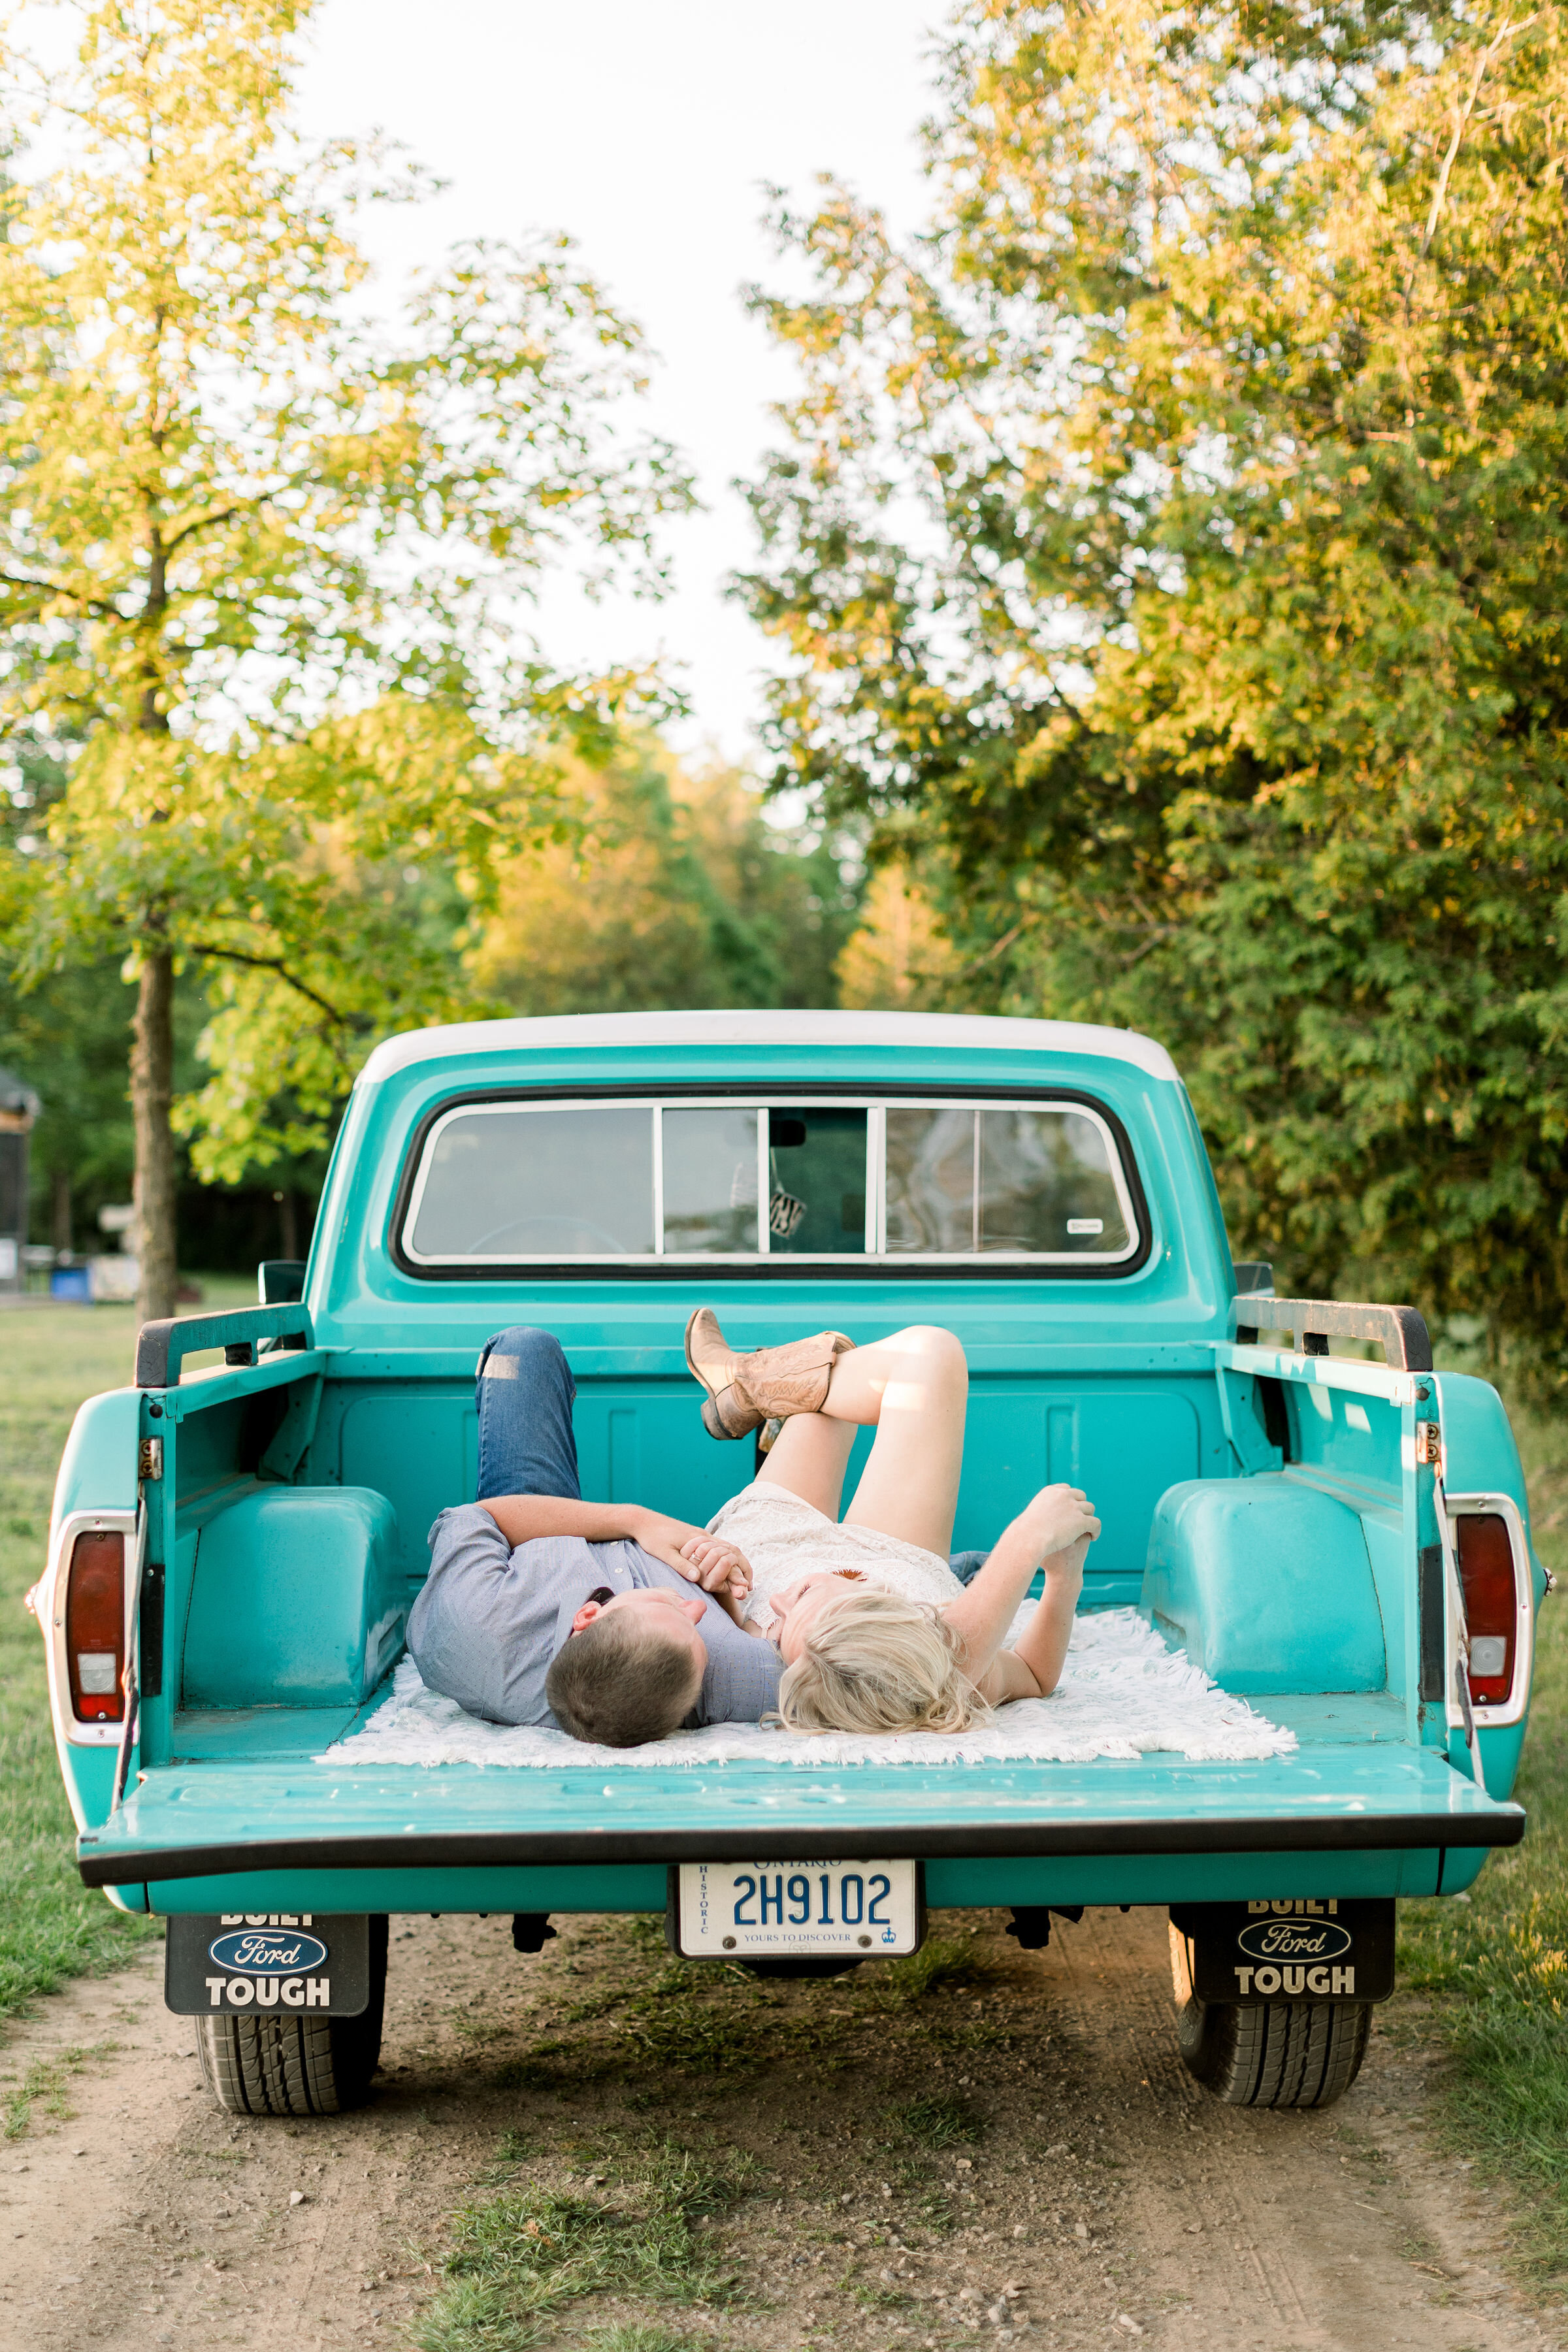  Ottawa, Canada photographer, Chelsea Mason photography captures this engaged couple lying in the bed of this vintage Ford pickup truck during this southern-styled shoot. engagement photographer Ottawa Canada ford pickup truck prop #ChelseaMasonPhoto